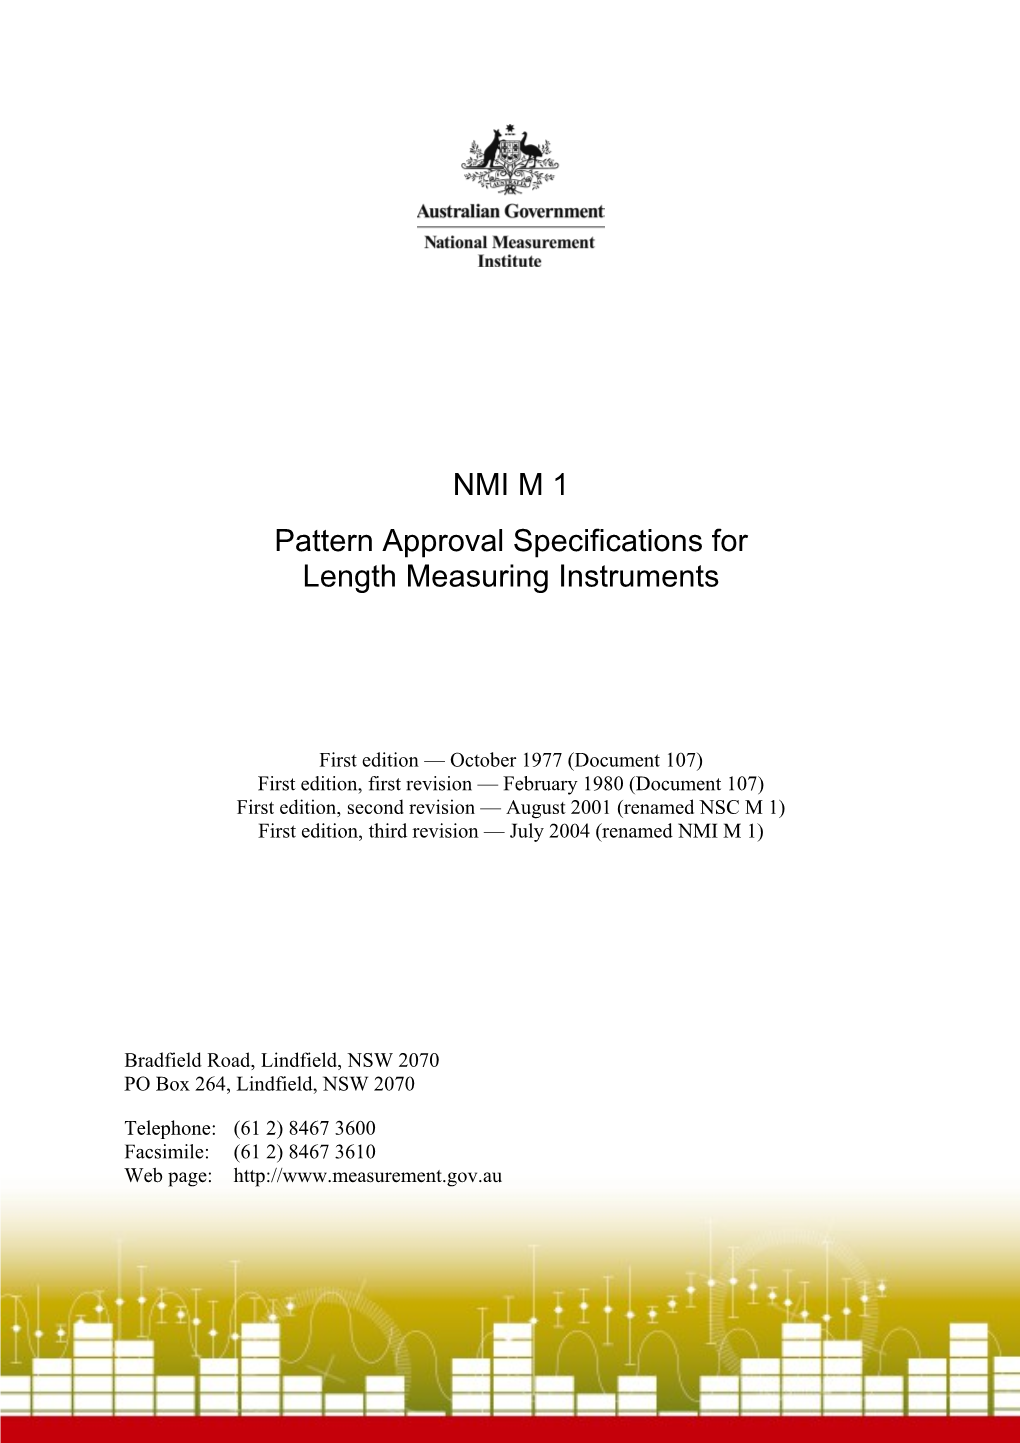 NMI M 1 Pattern Approval Specifications for Length Measuring Instruments